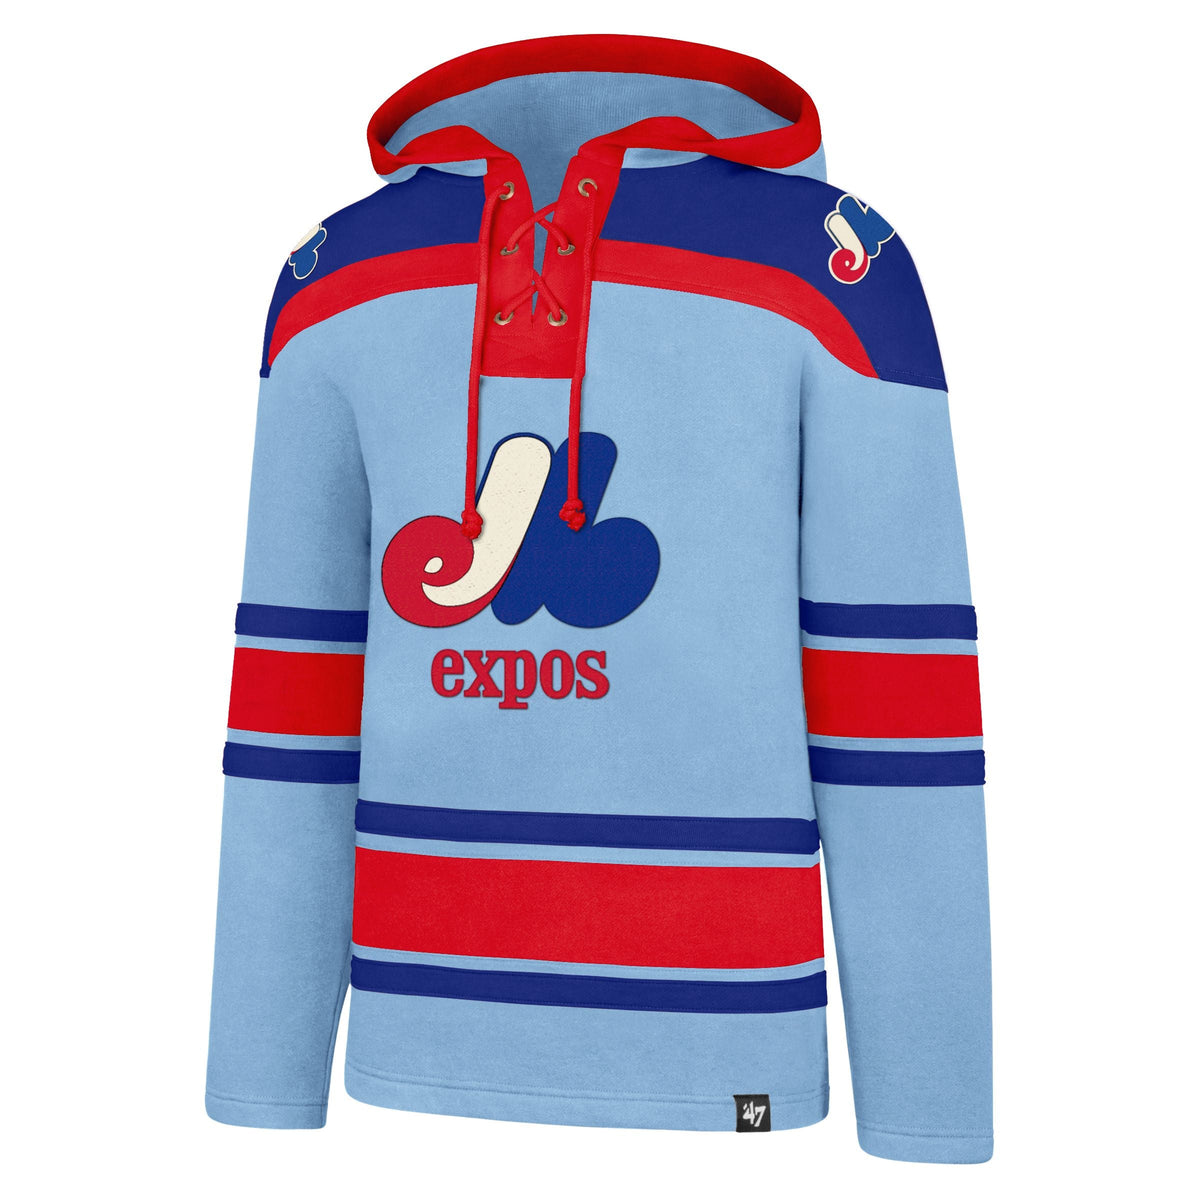  '47 Quebec Nordiques NHL Heavyweight Jersey Lacer